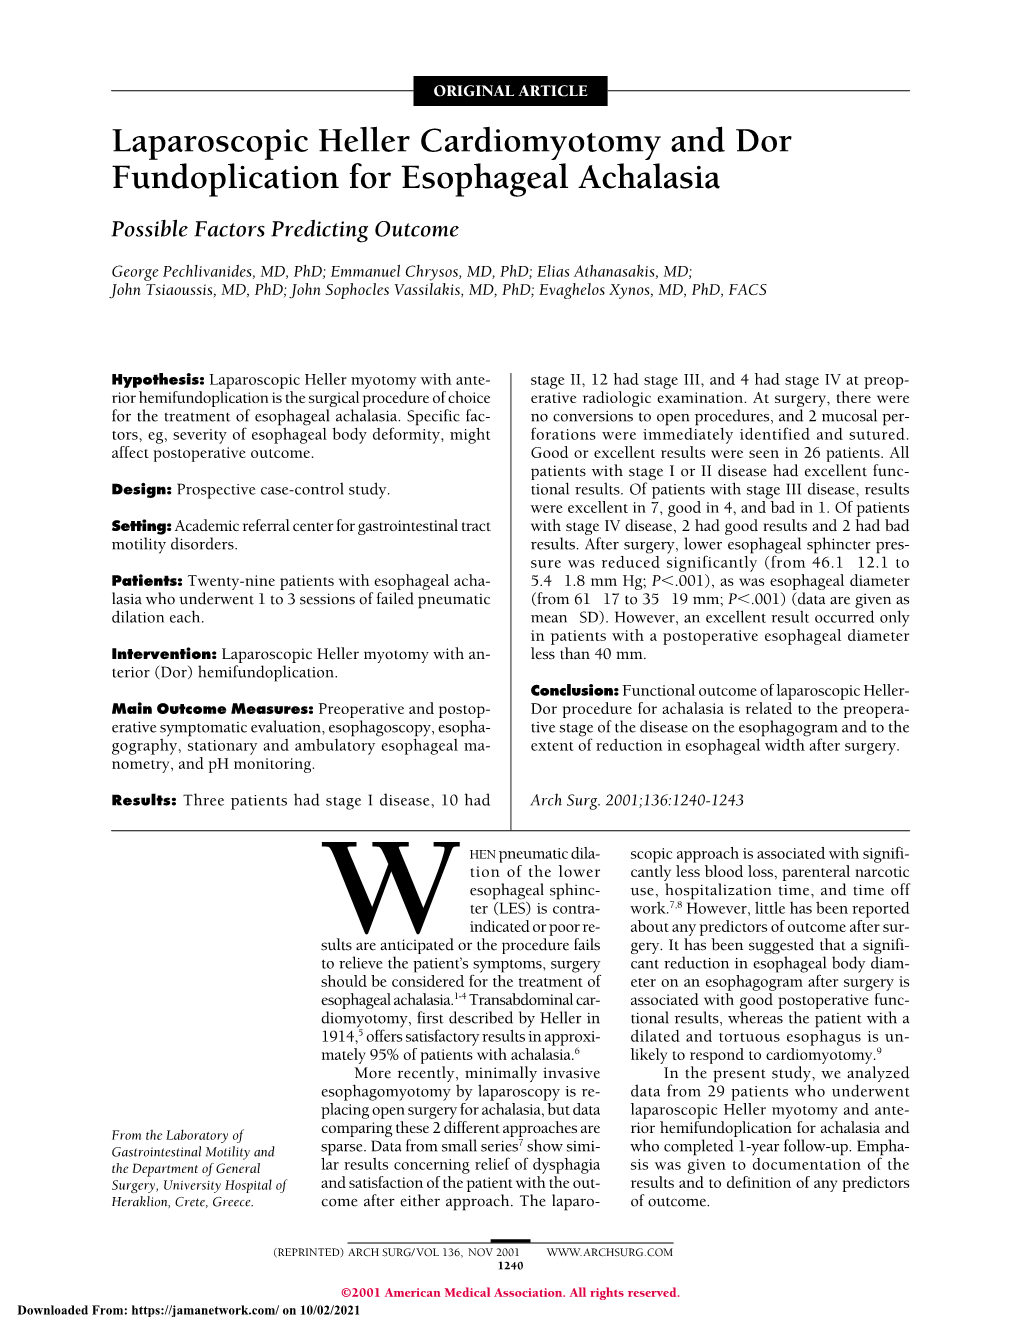 Laparoscopic Heller Cardiomyotomy and Dor Fundoplication for Esophageal Achalasia Possible Factors Predicting Outcome